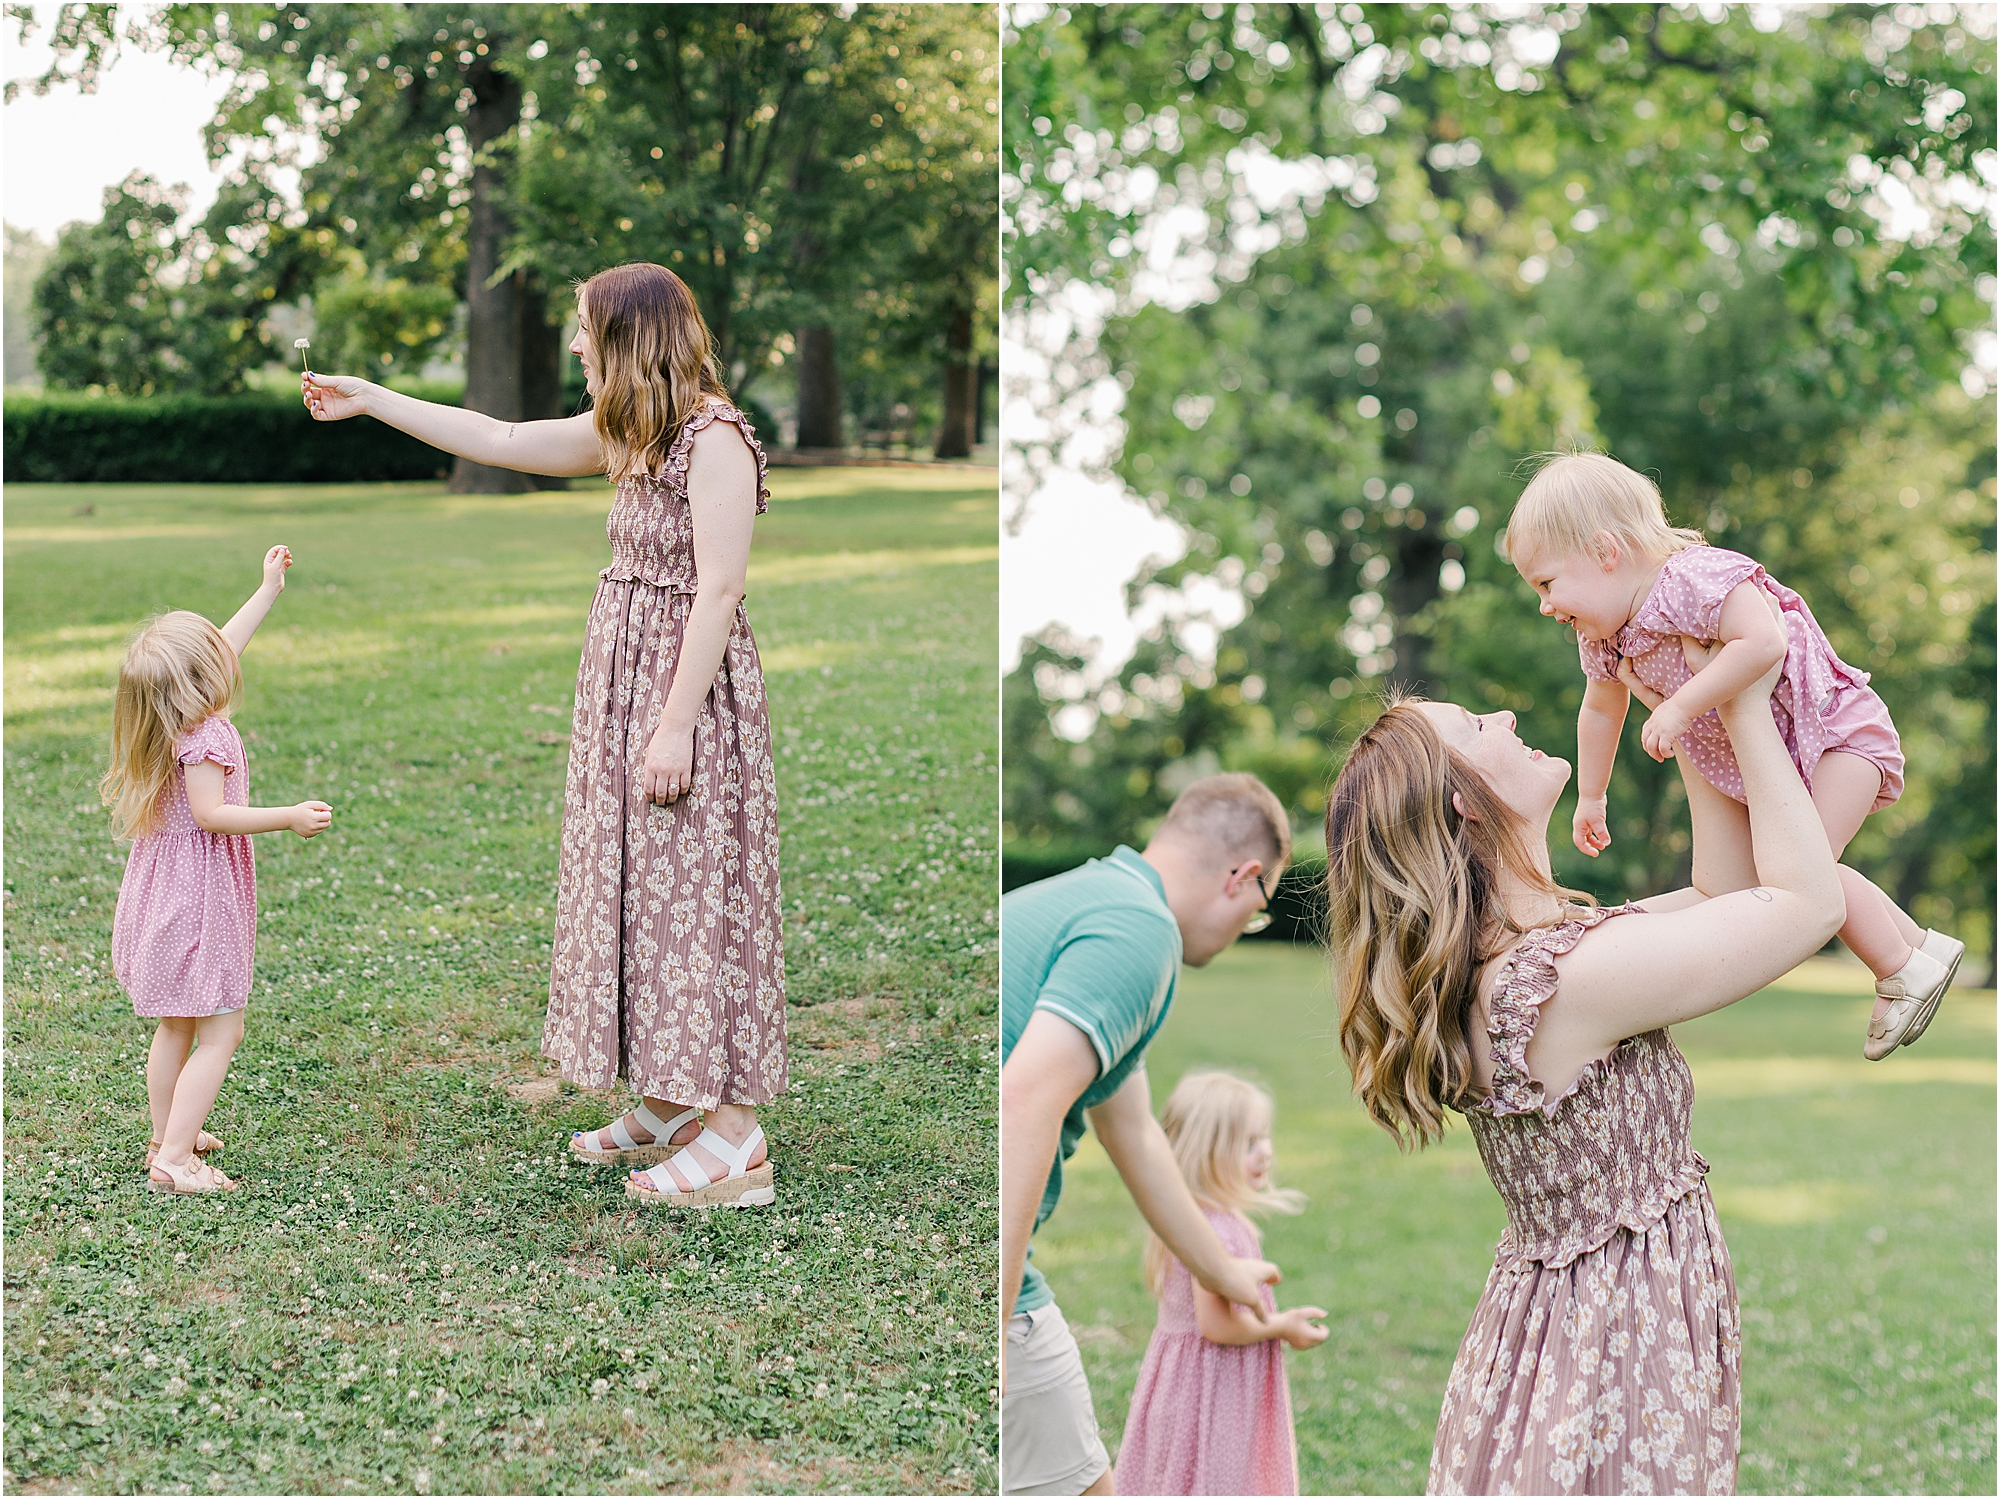 Gaskins family playing together at the park during their summer family photo session.